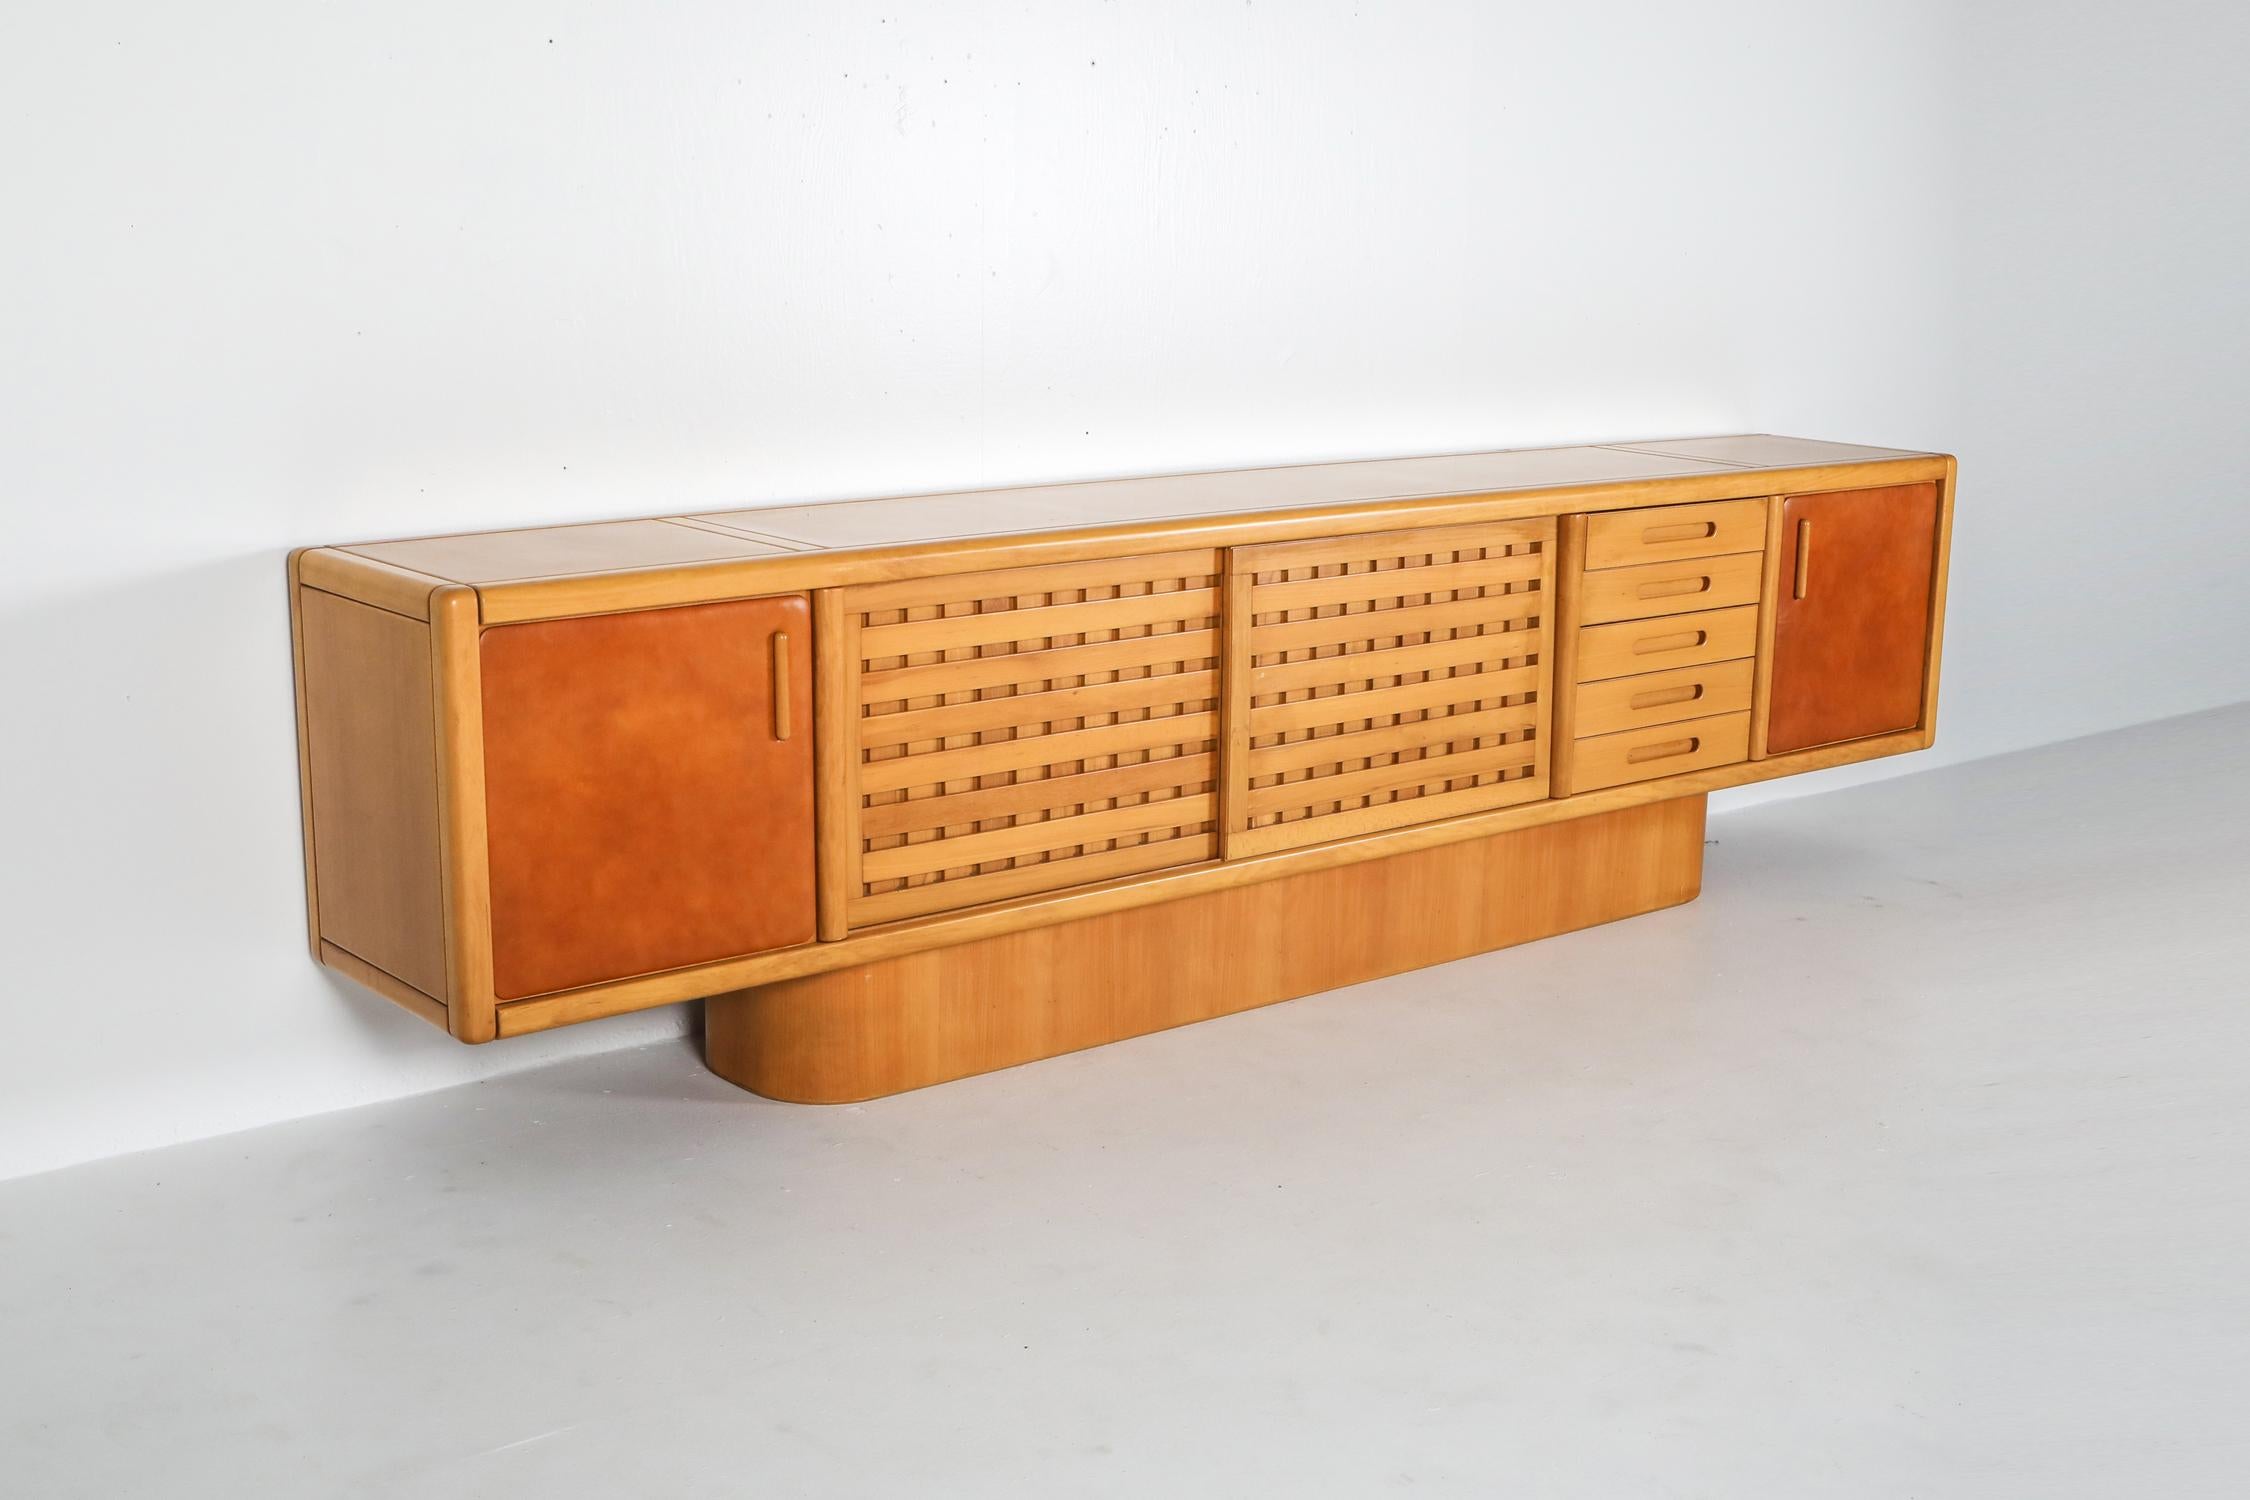 Mario Marenco credenza, Postmodern, beech, tan leather, Italy, 1970s

Impressive and large piece made in solid walnut.
The two exterior doors have a tan / cognac leather upholstery.
The two middle grid shaped doors are sliding both sides,